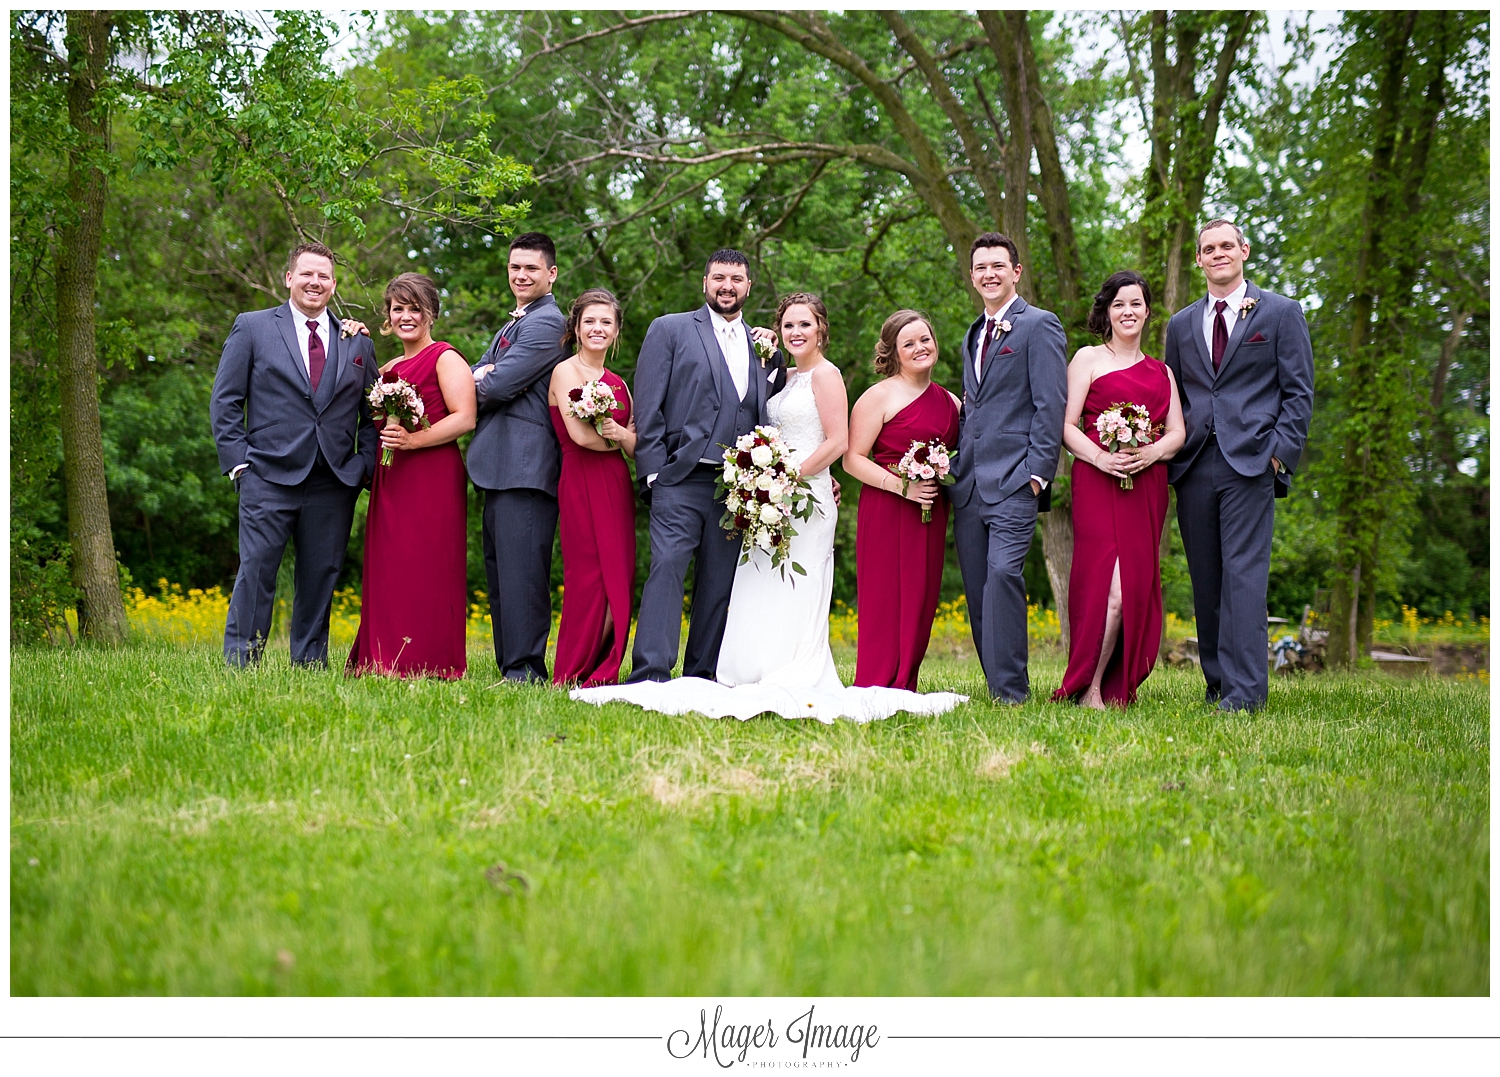 group outside ten 10 people wedding photography bouquets alternating dresses tuxes